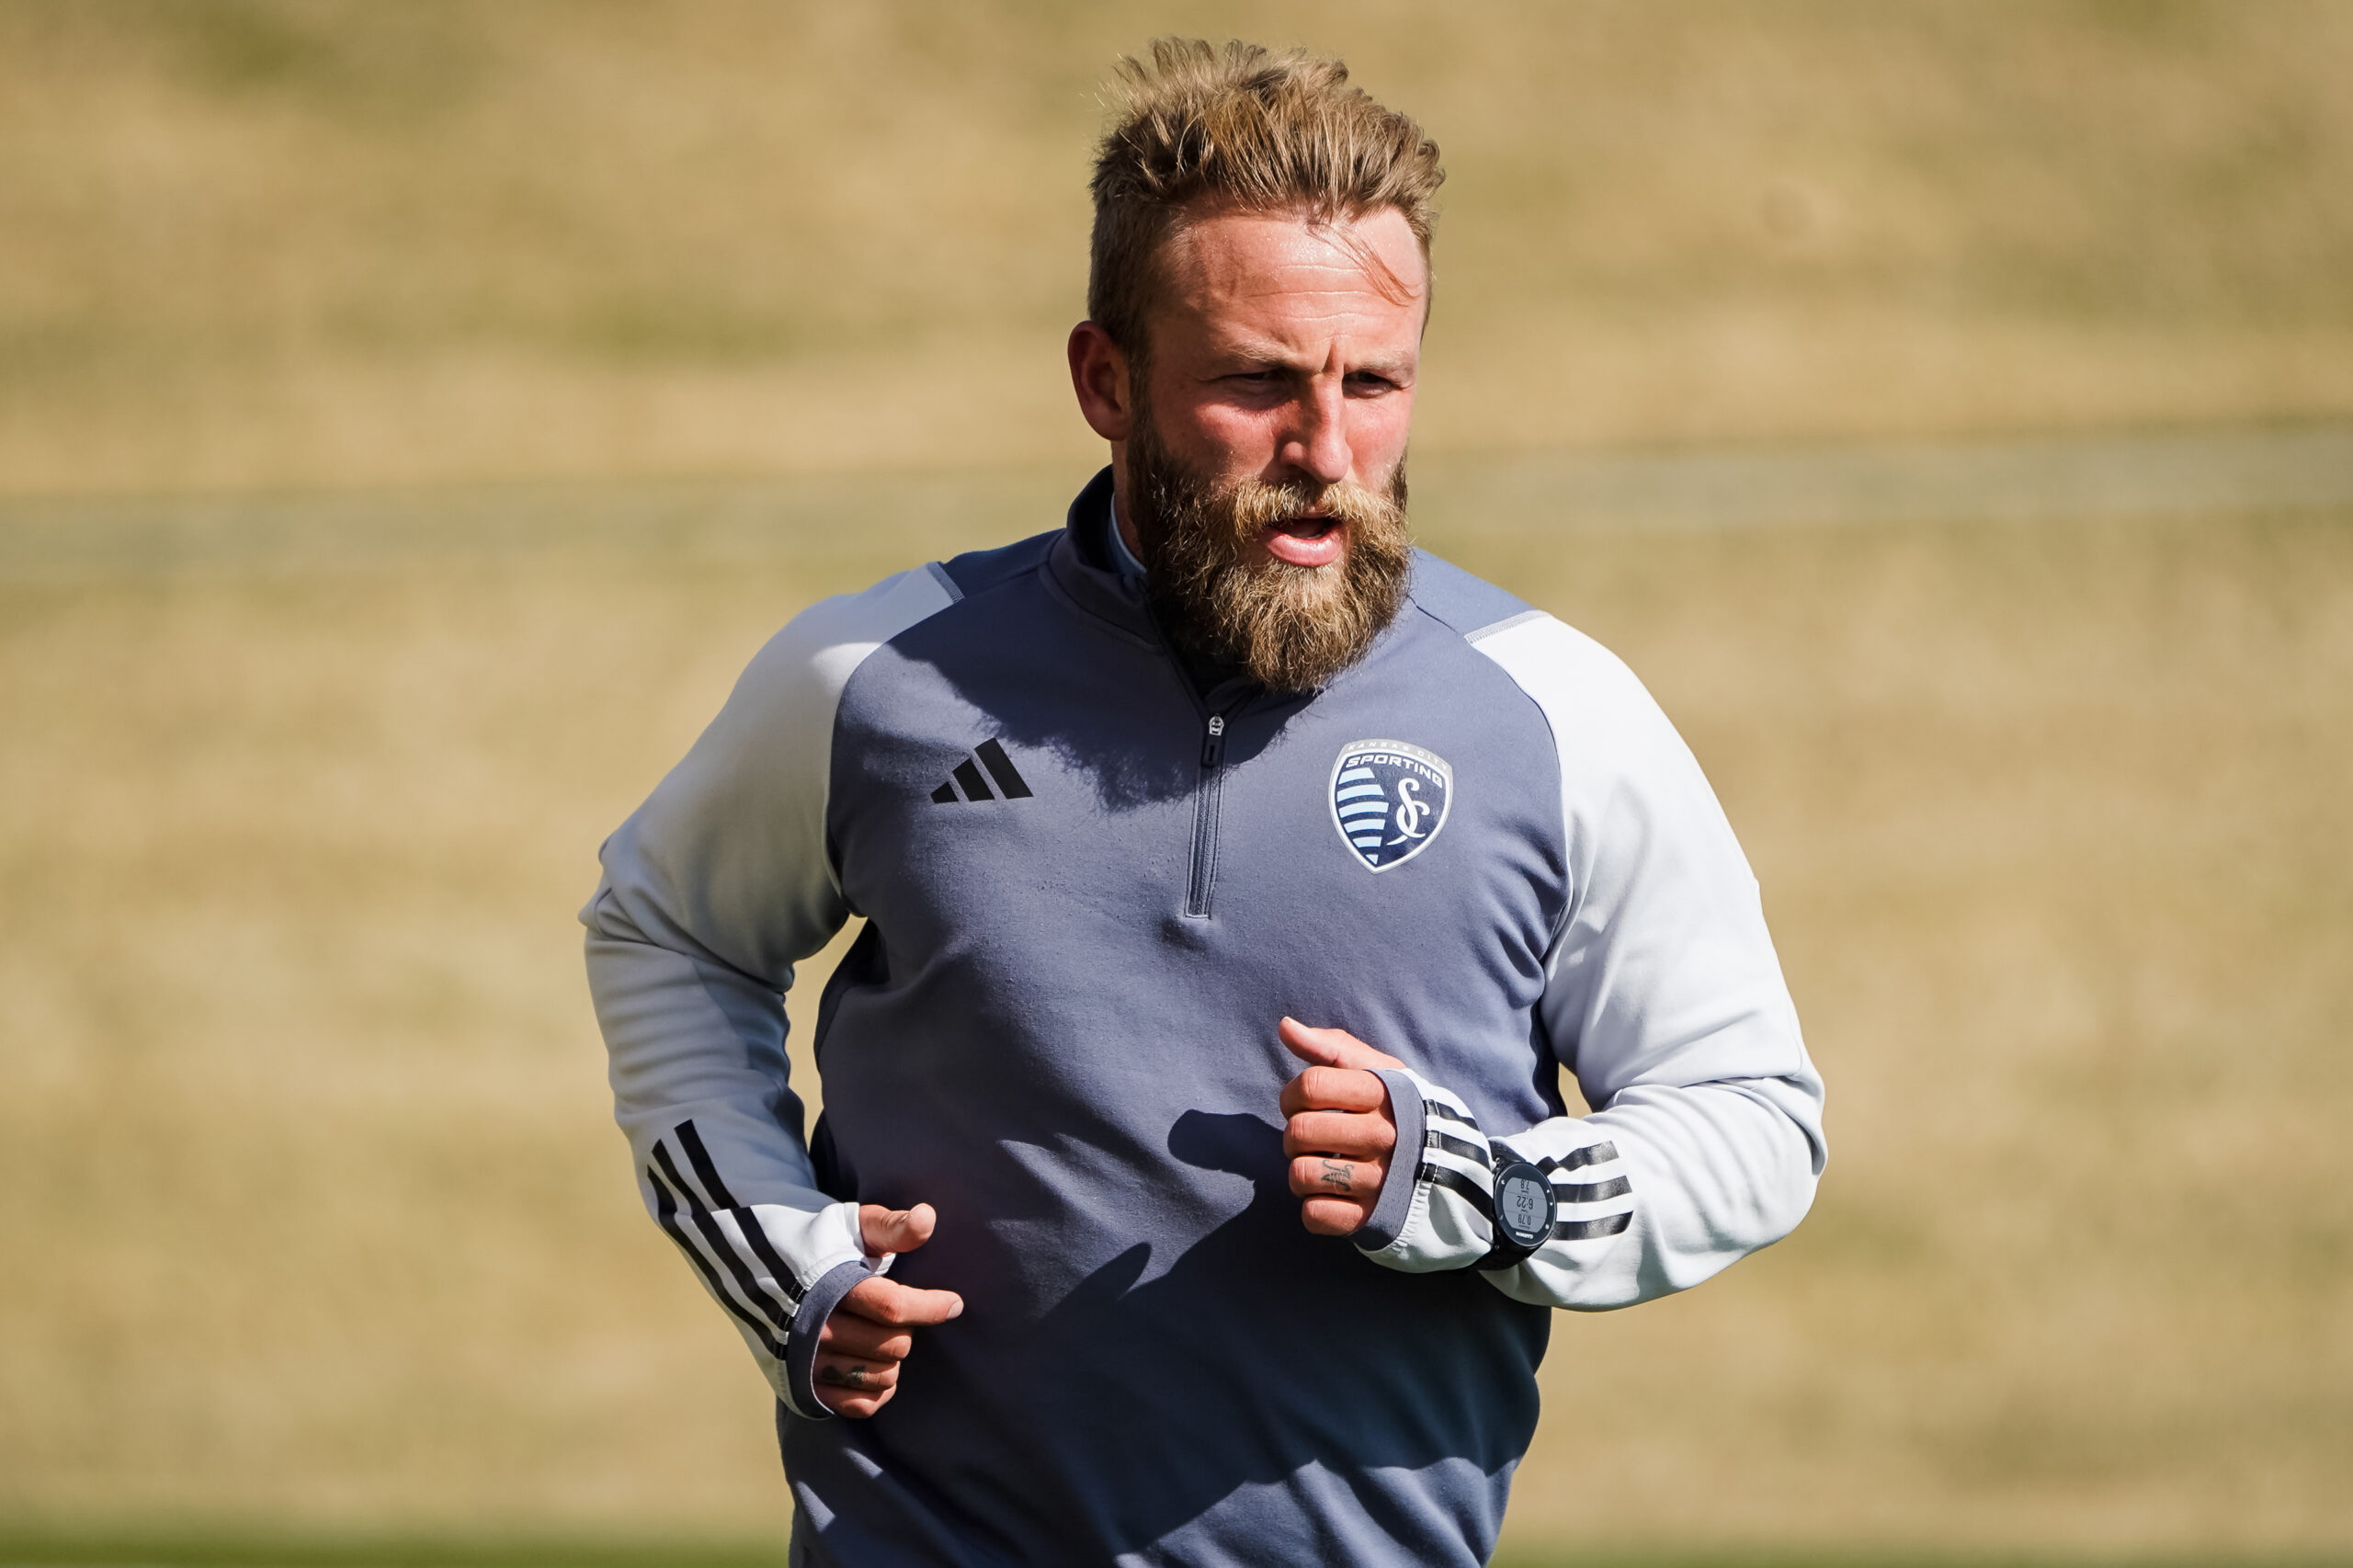 Sporting KC's Johnny Russell